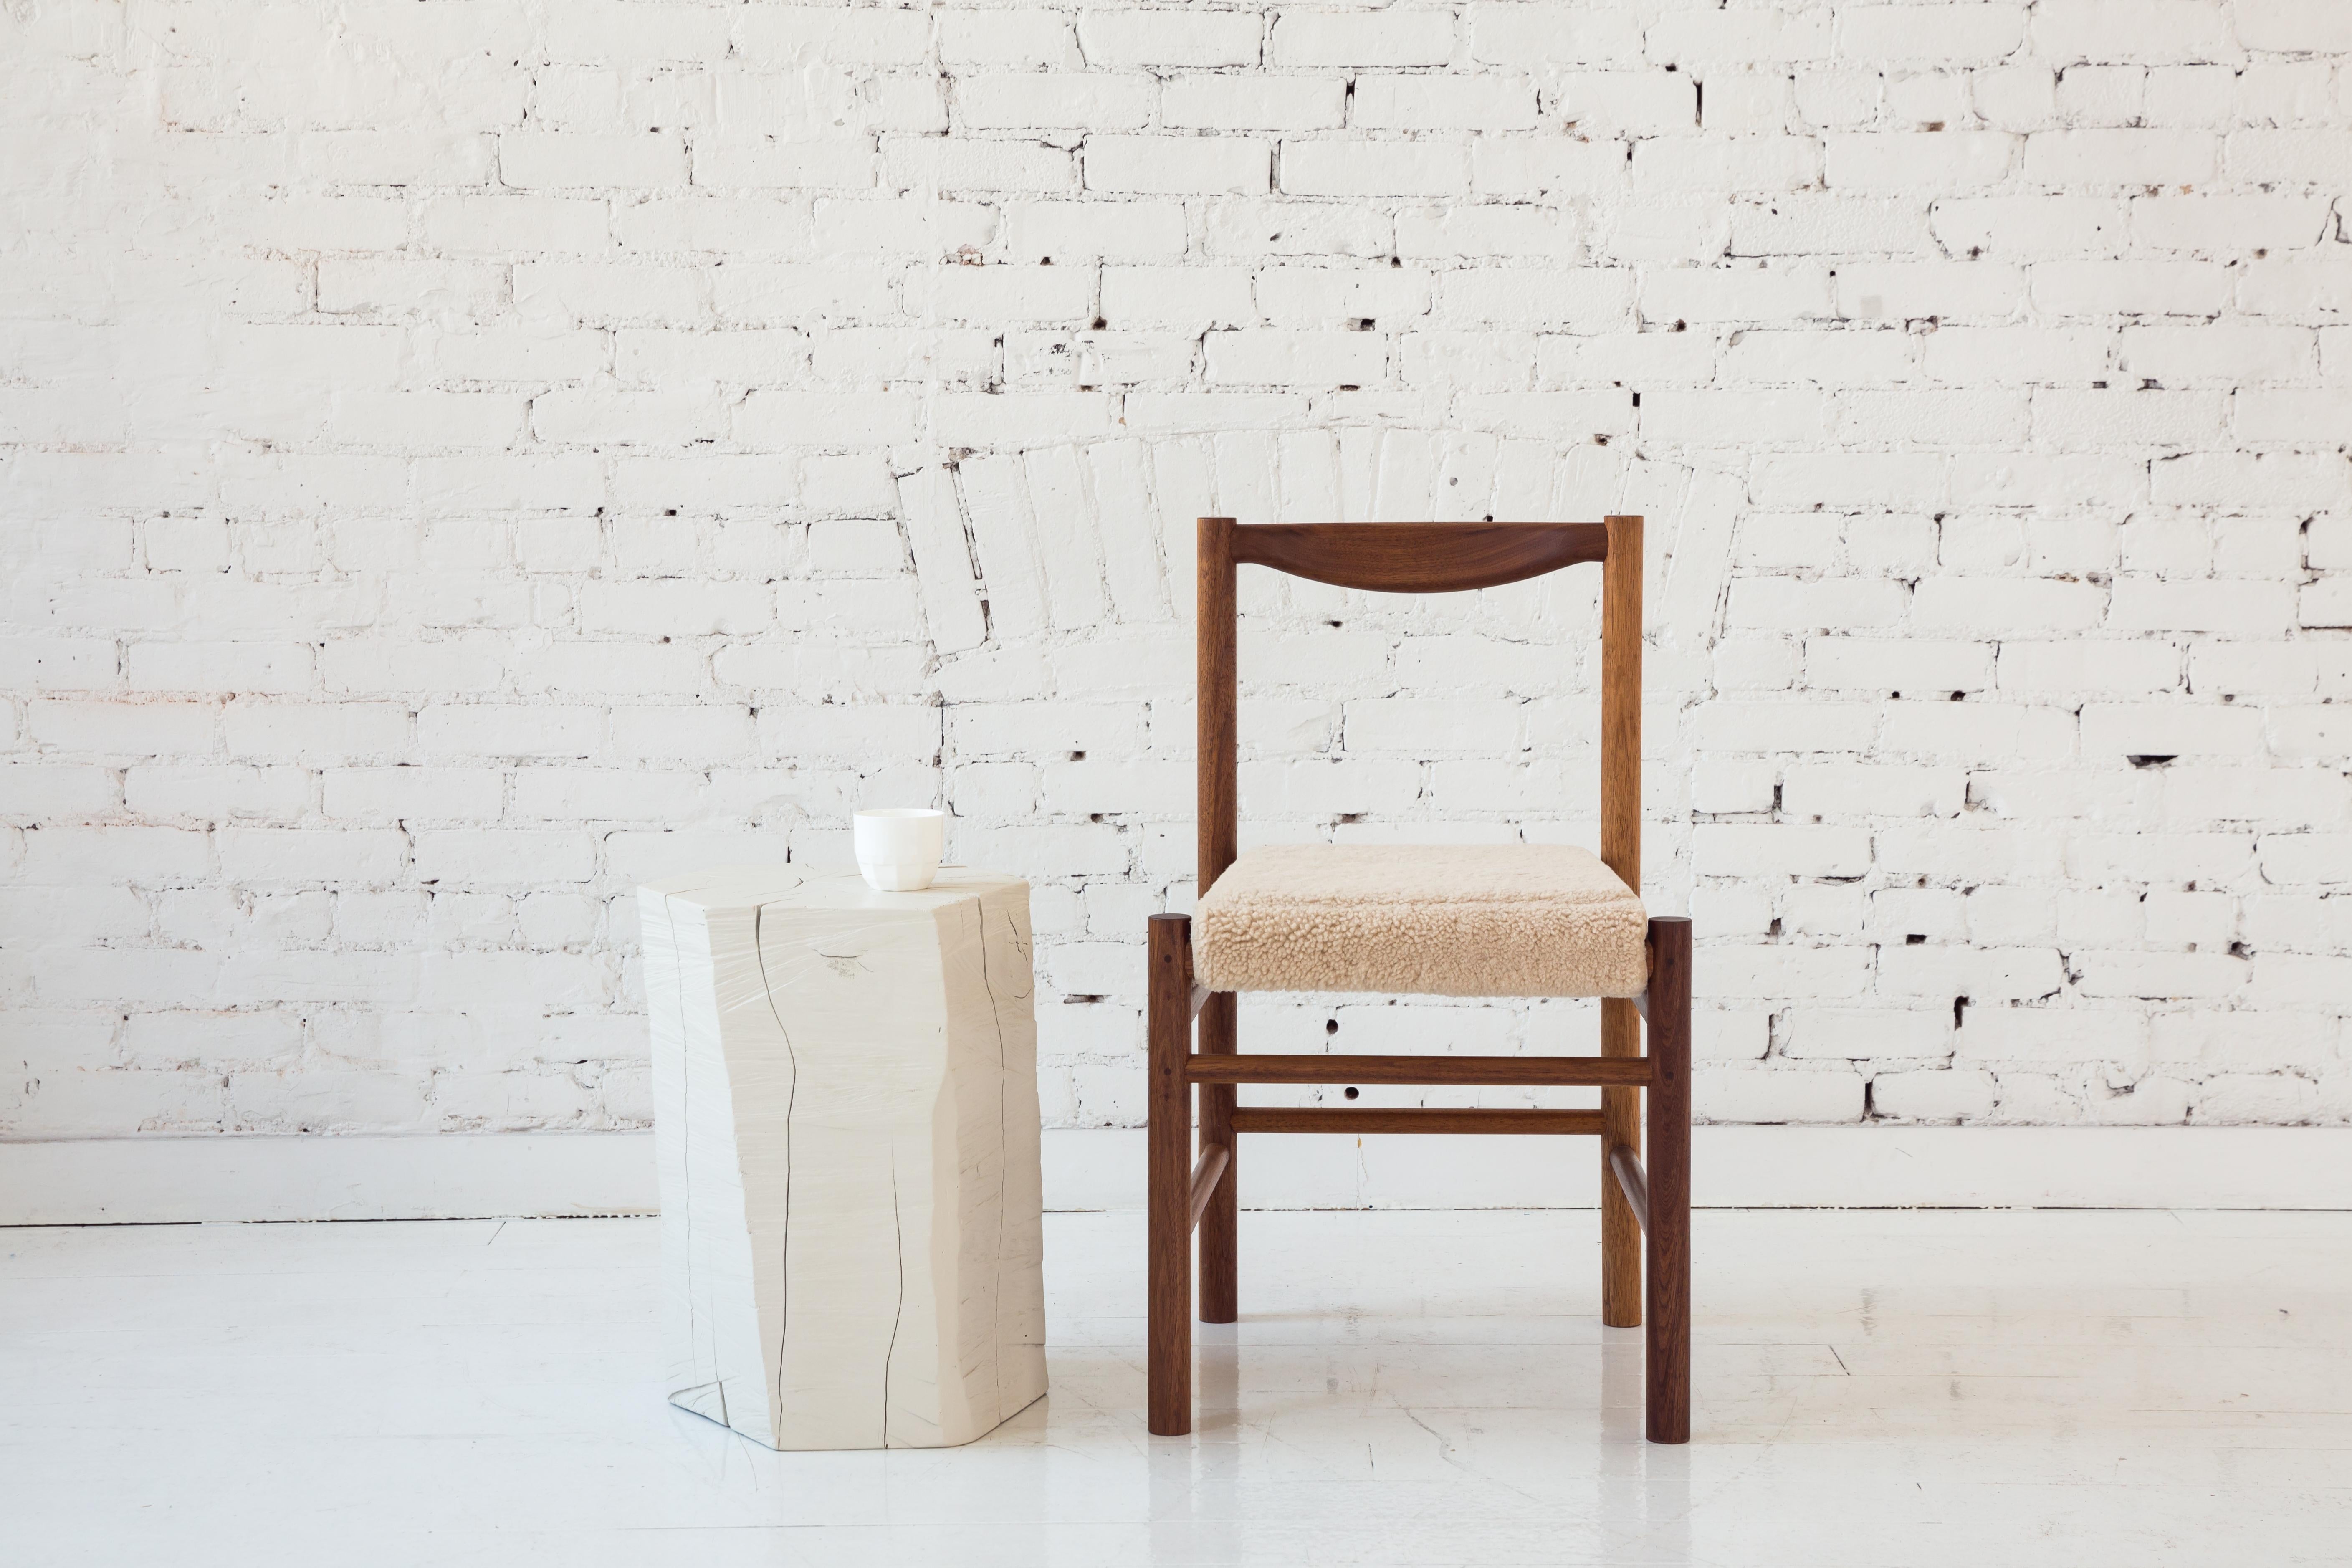 Shaker inspired wood side chair with comfortable contoured back rest. Option for a plain wooden seat pan or a seat pan with a low profile leather or shearling pad. This chair's simplicity makes it versatile to work perfectly in many different